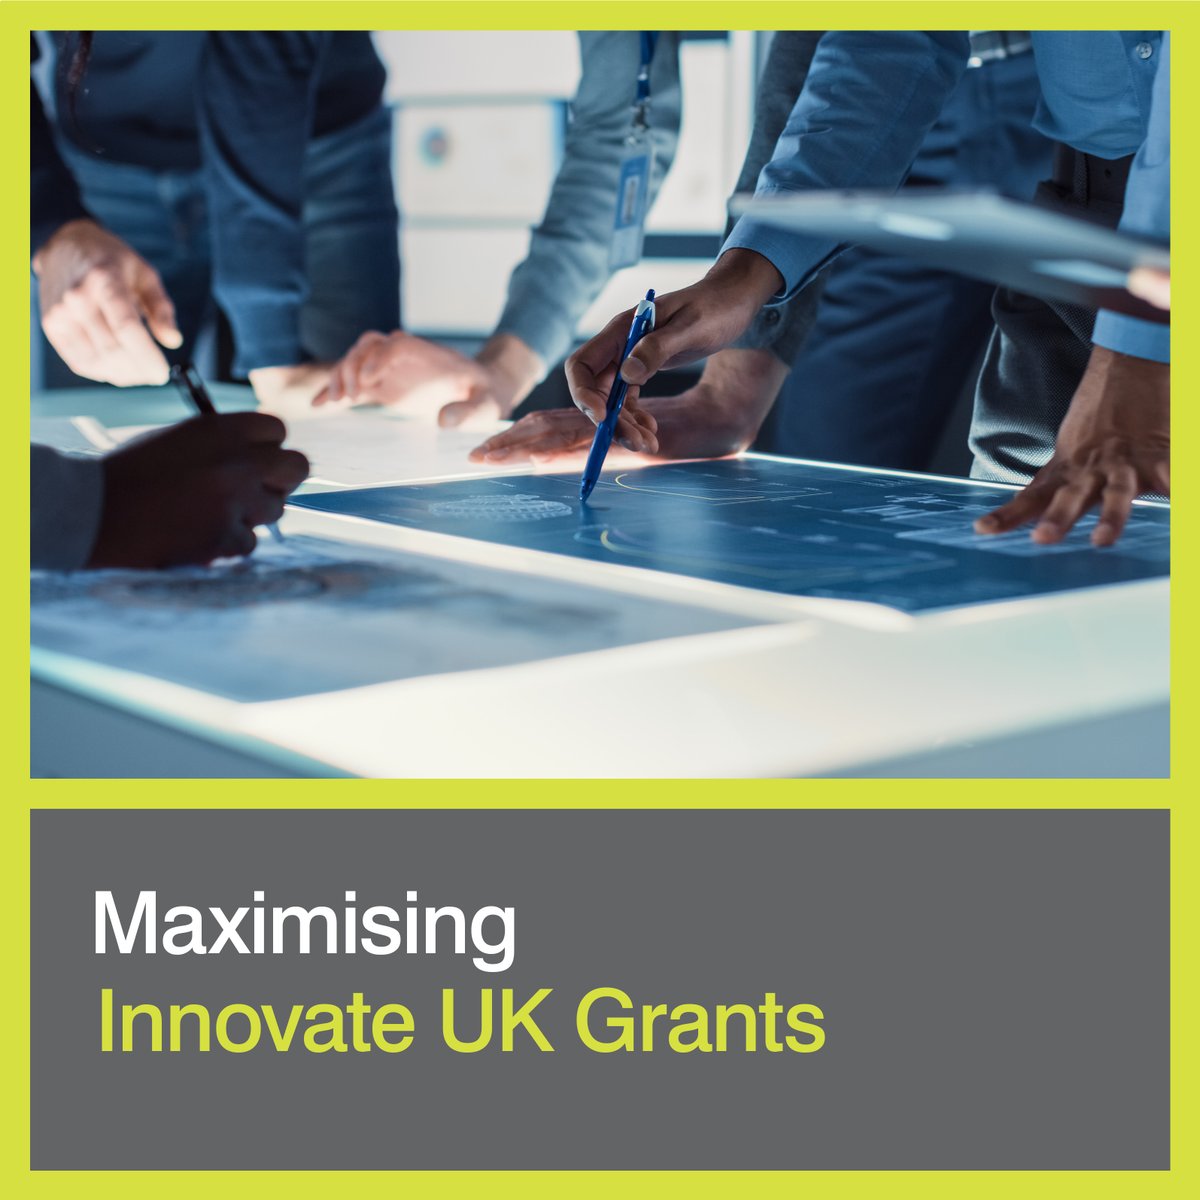 Innovate UK, a part of UK Research and Innovation is focused on helping the development of UK businesses through innovation, enabling the creation of new products, services, and processes essential for growth and scalability. Find out more below: mapartners.co.uk/blog/maximisin…